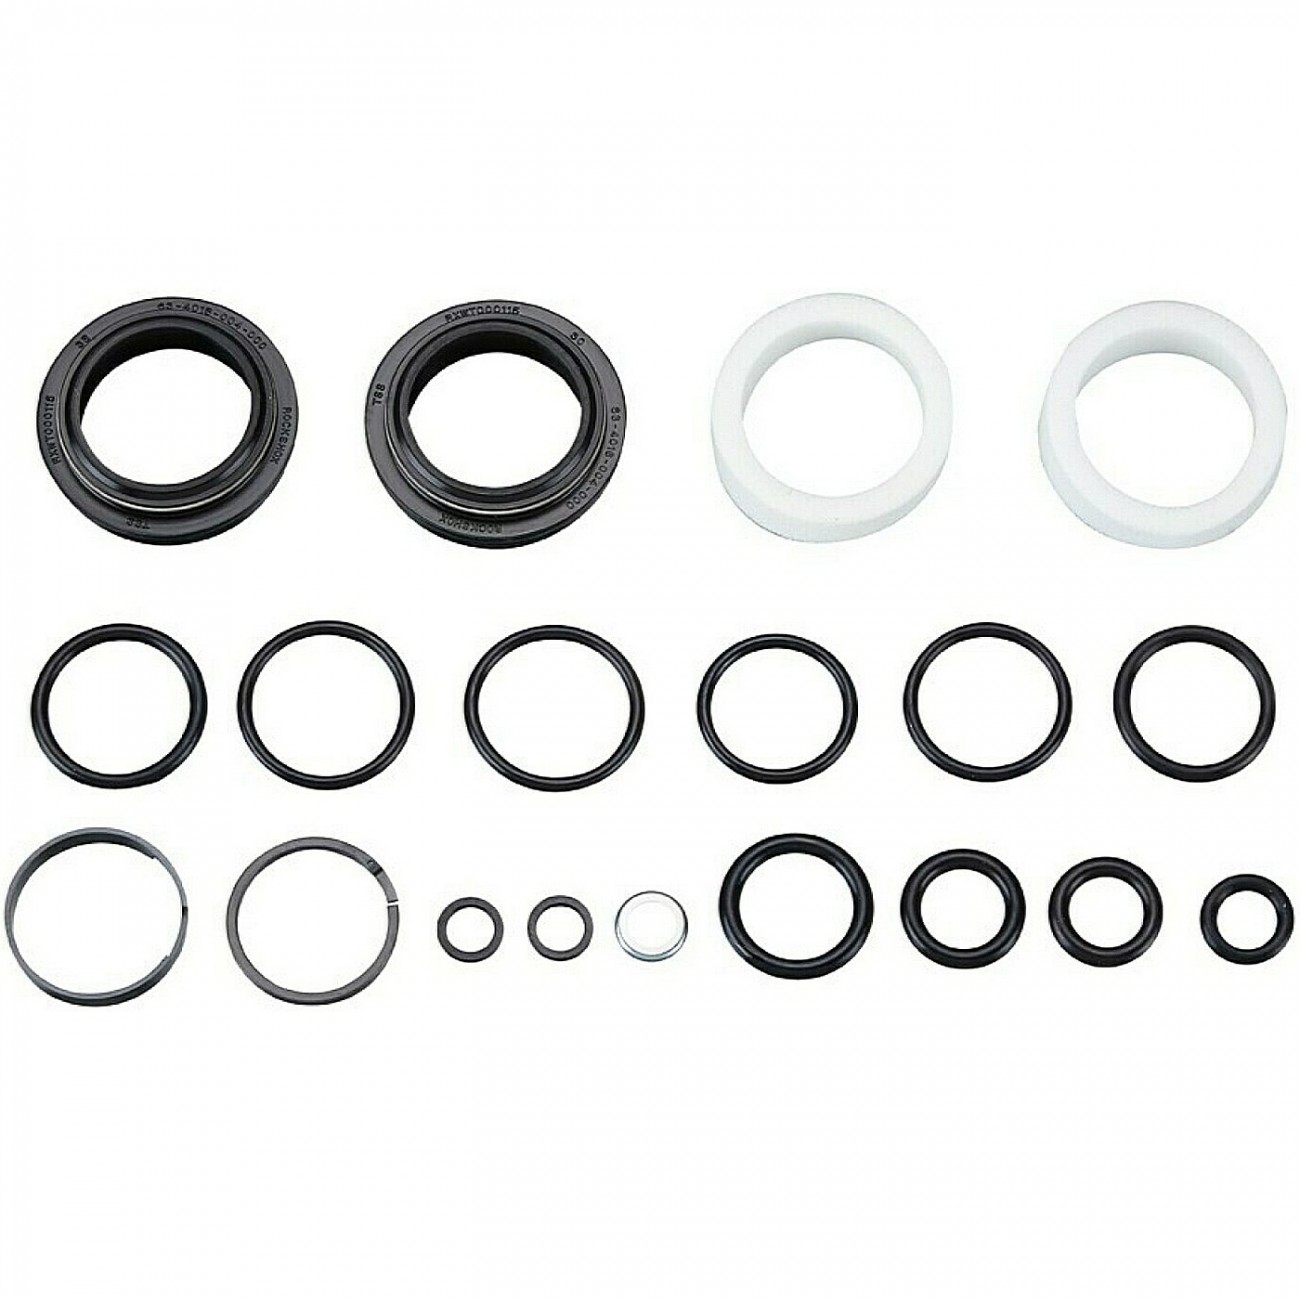 Am fork service kit basic (includes dust seals foam rings o-ring seals) - reve - 1